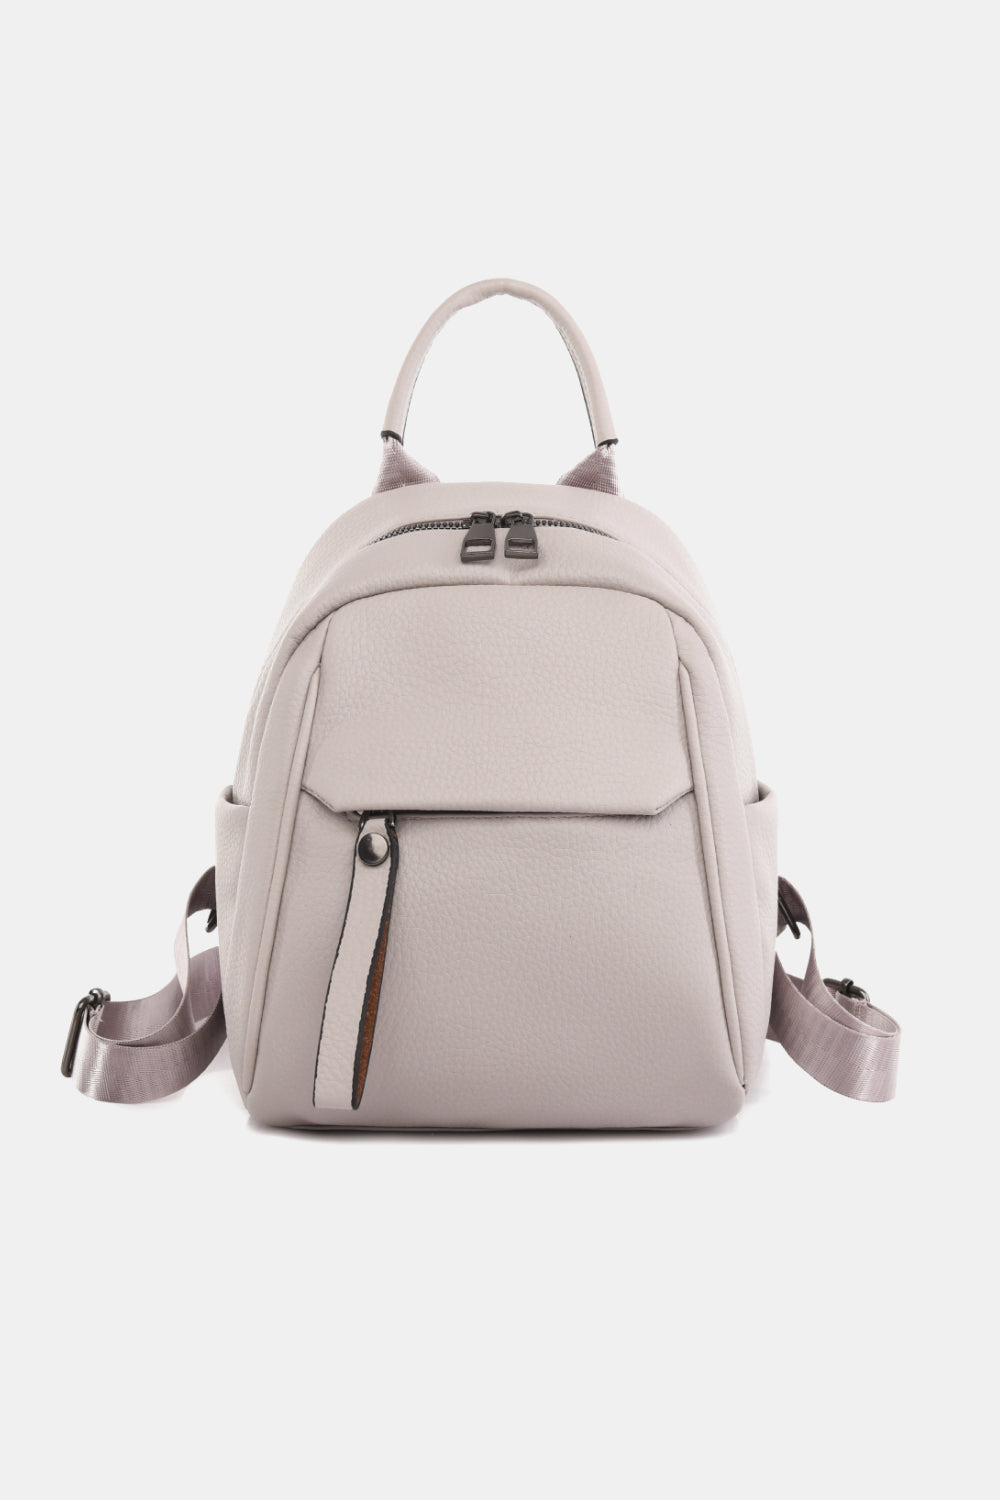 Lavender Small PU Leather Backpack Handbags